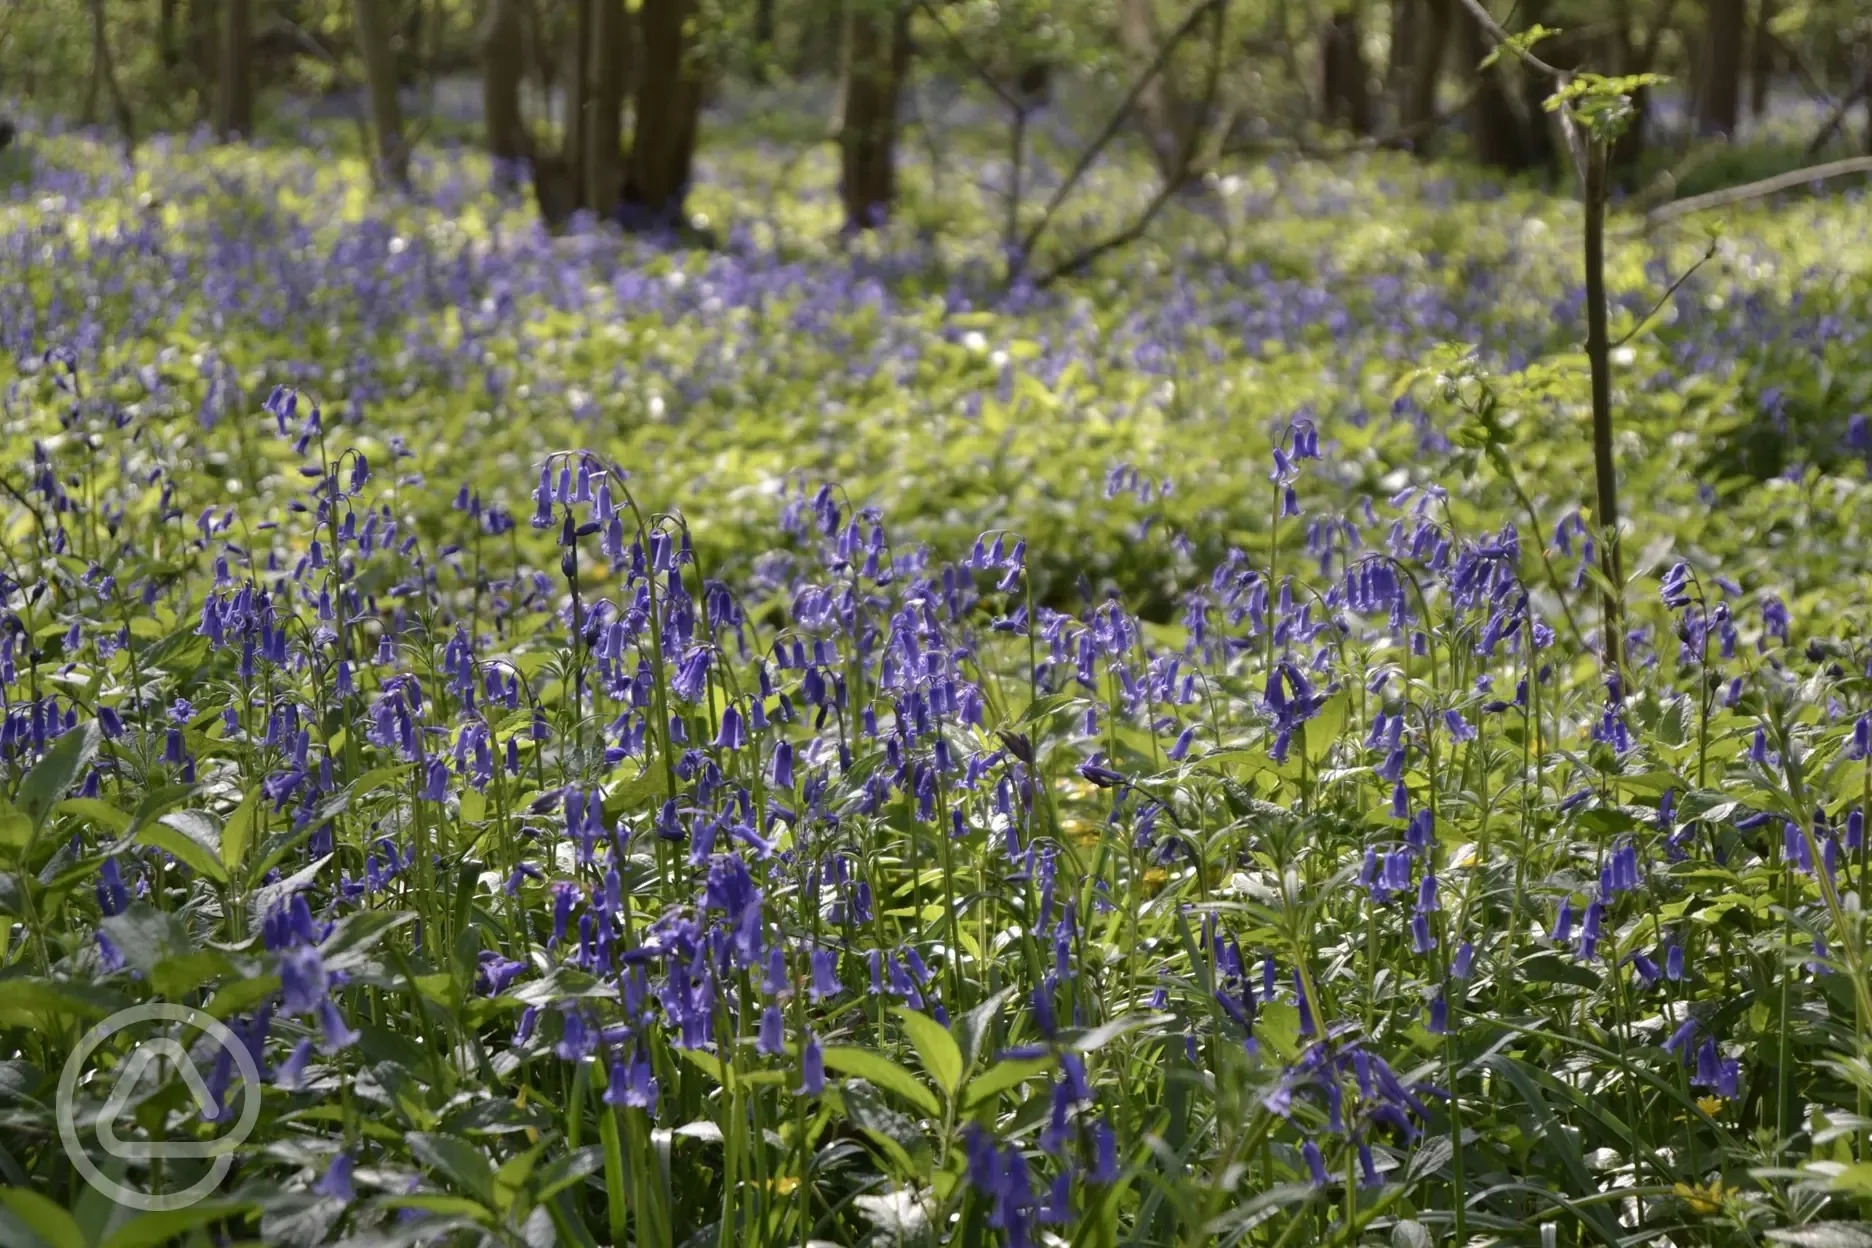 Local bluebell wood